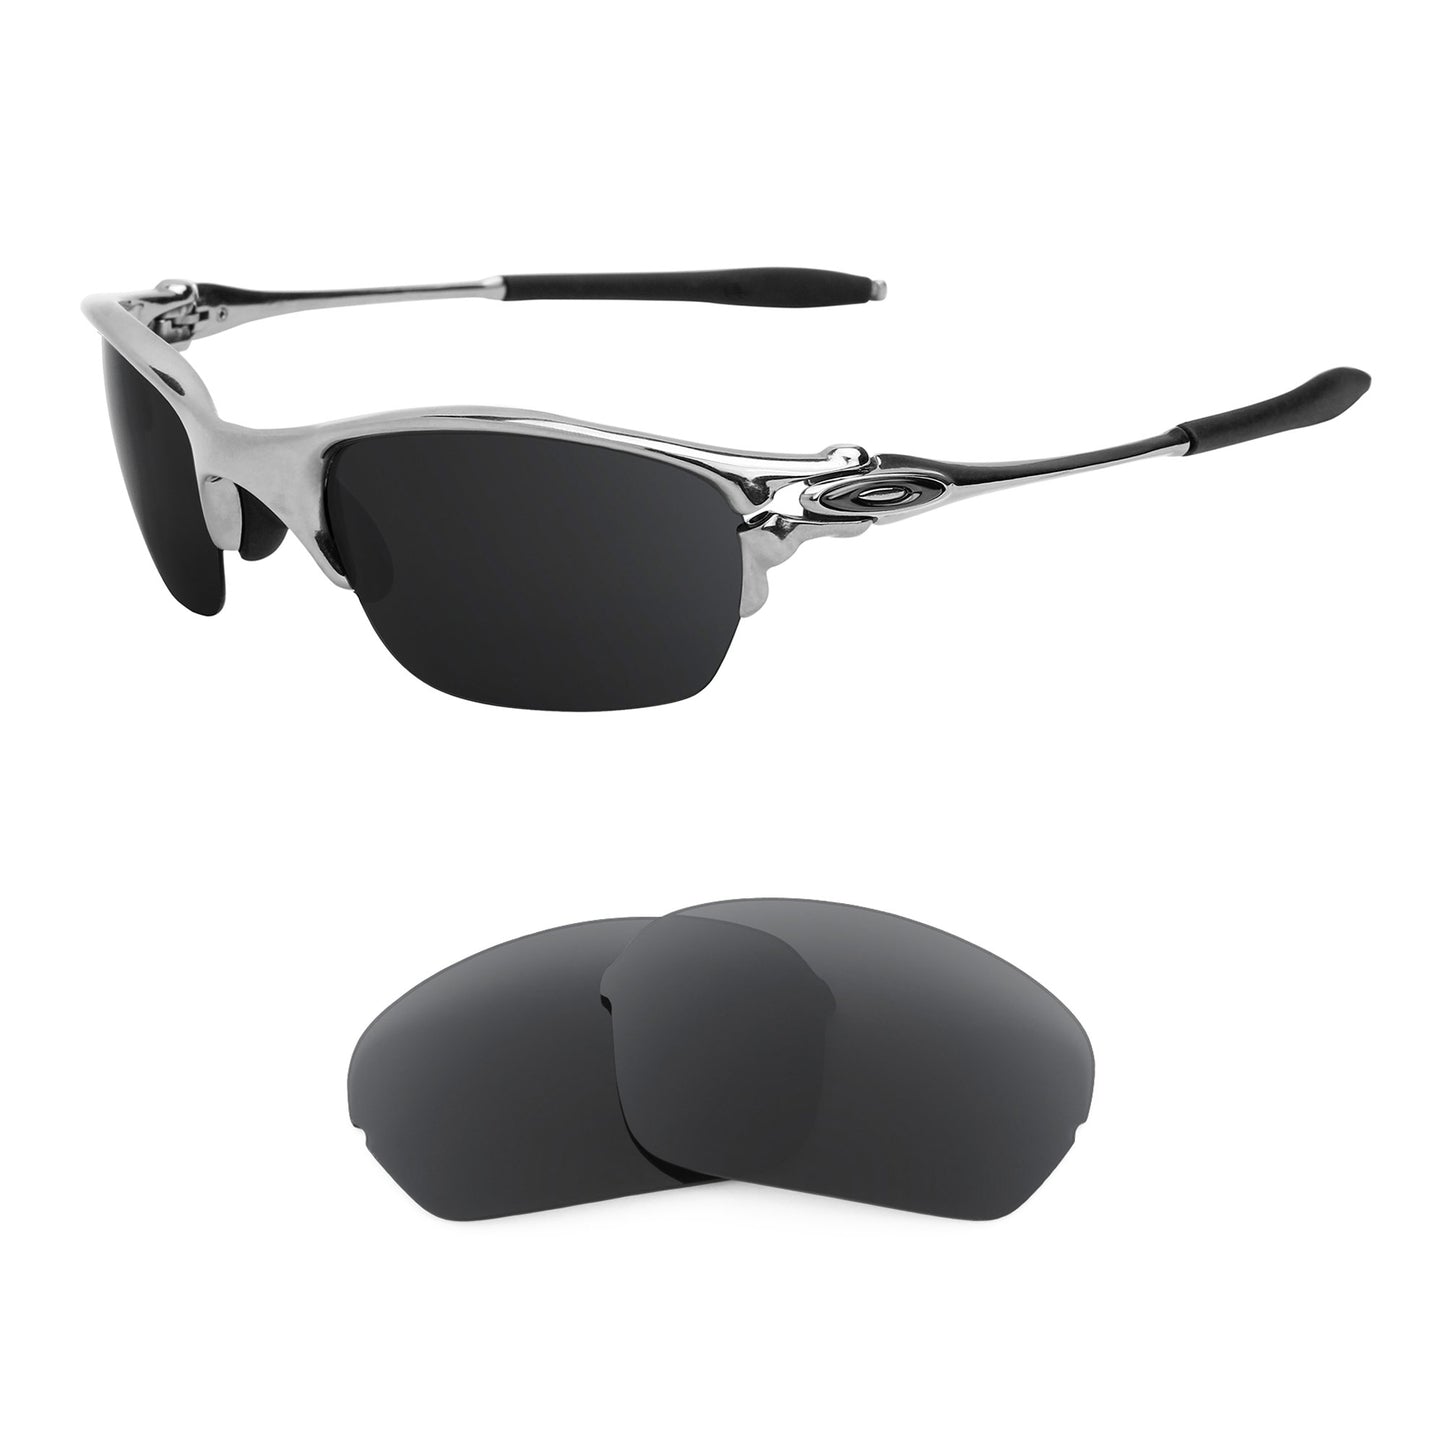 Oakley Half X sunglasses with replacement lenses